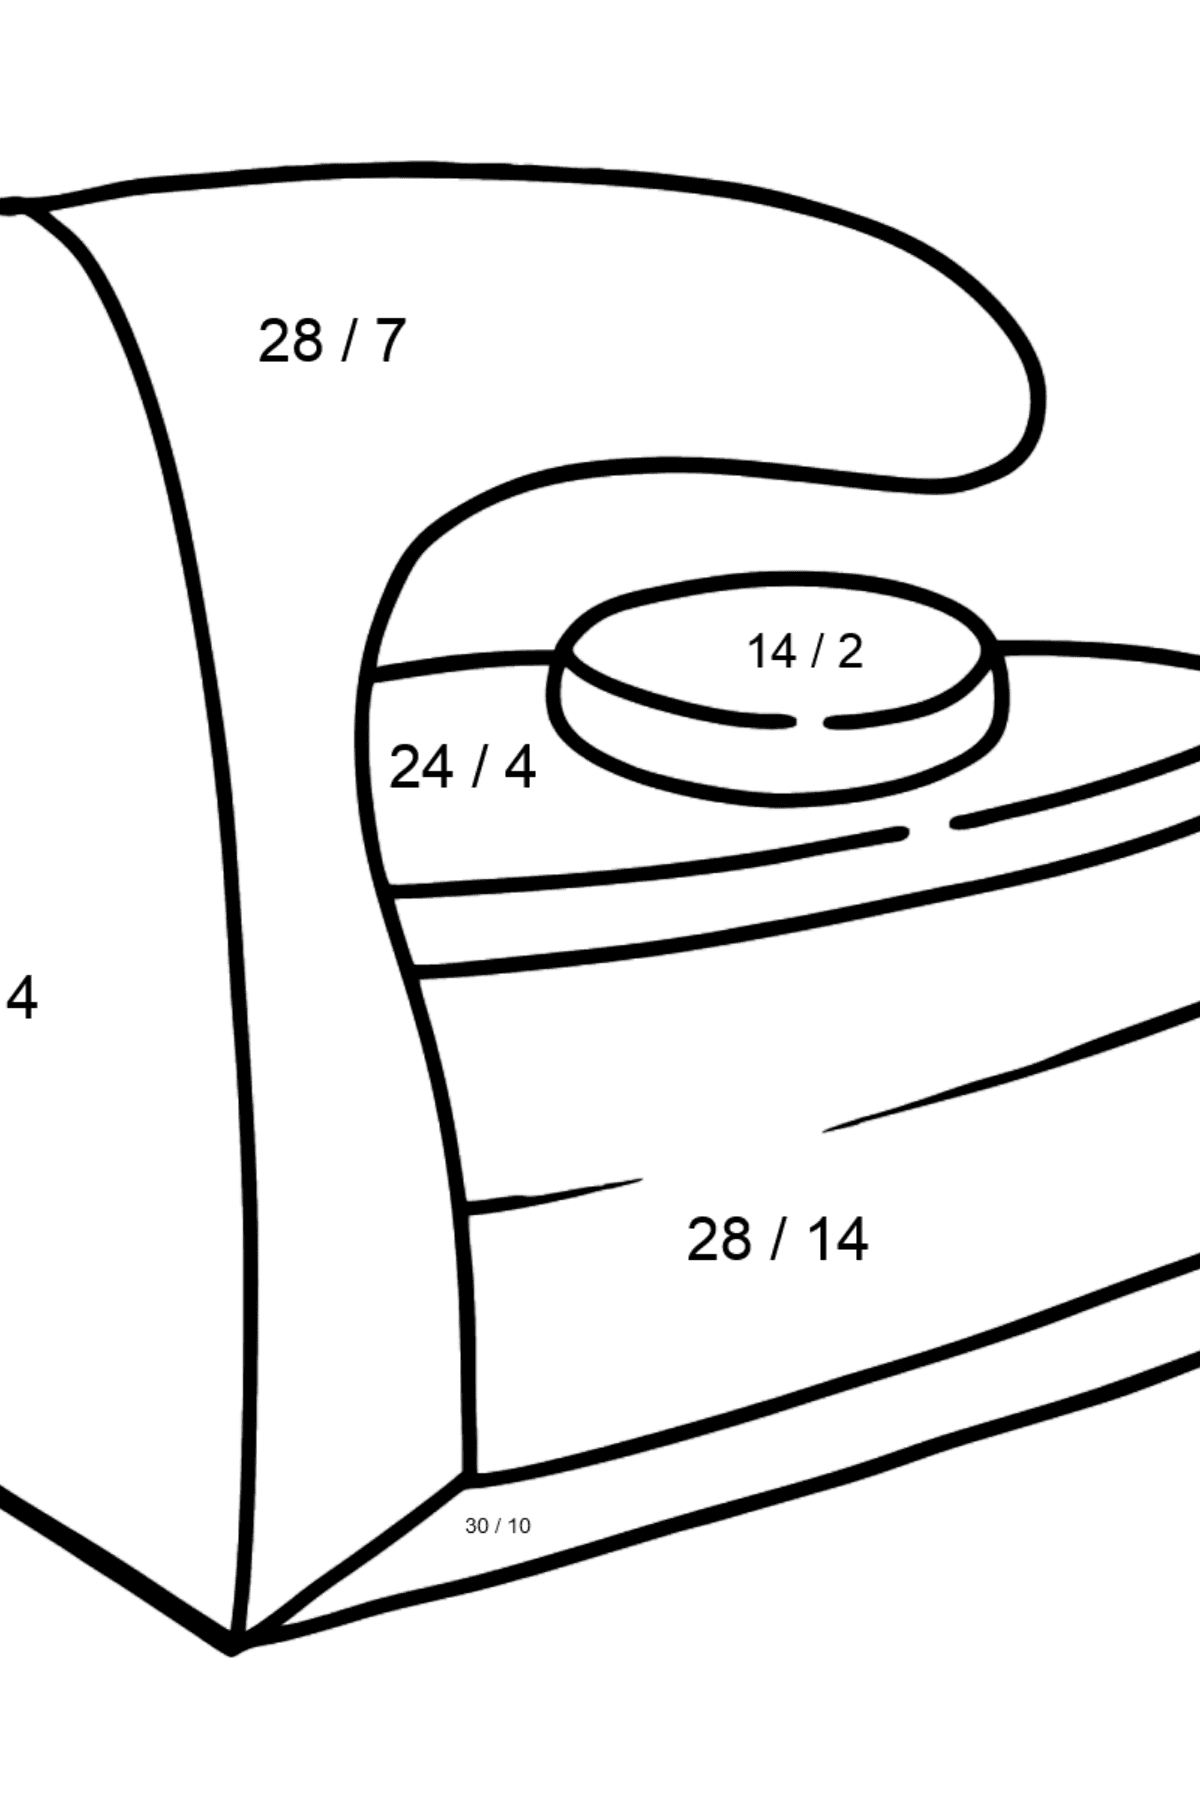 Iron for ironing coloring page - Math Coloring - Division for Kids